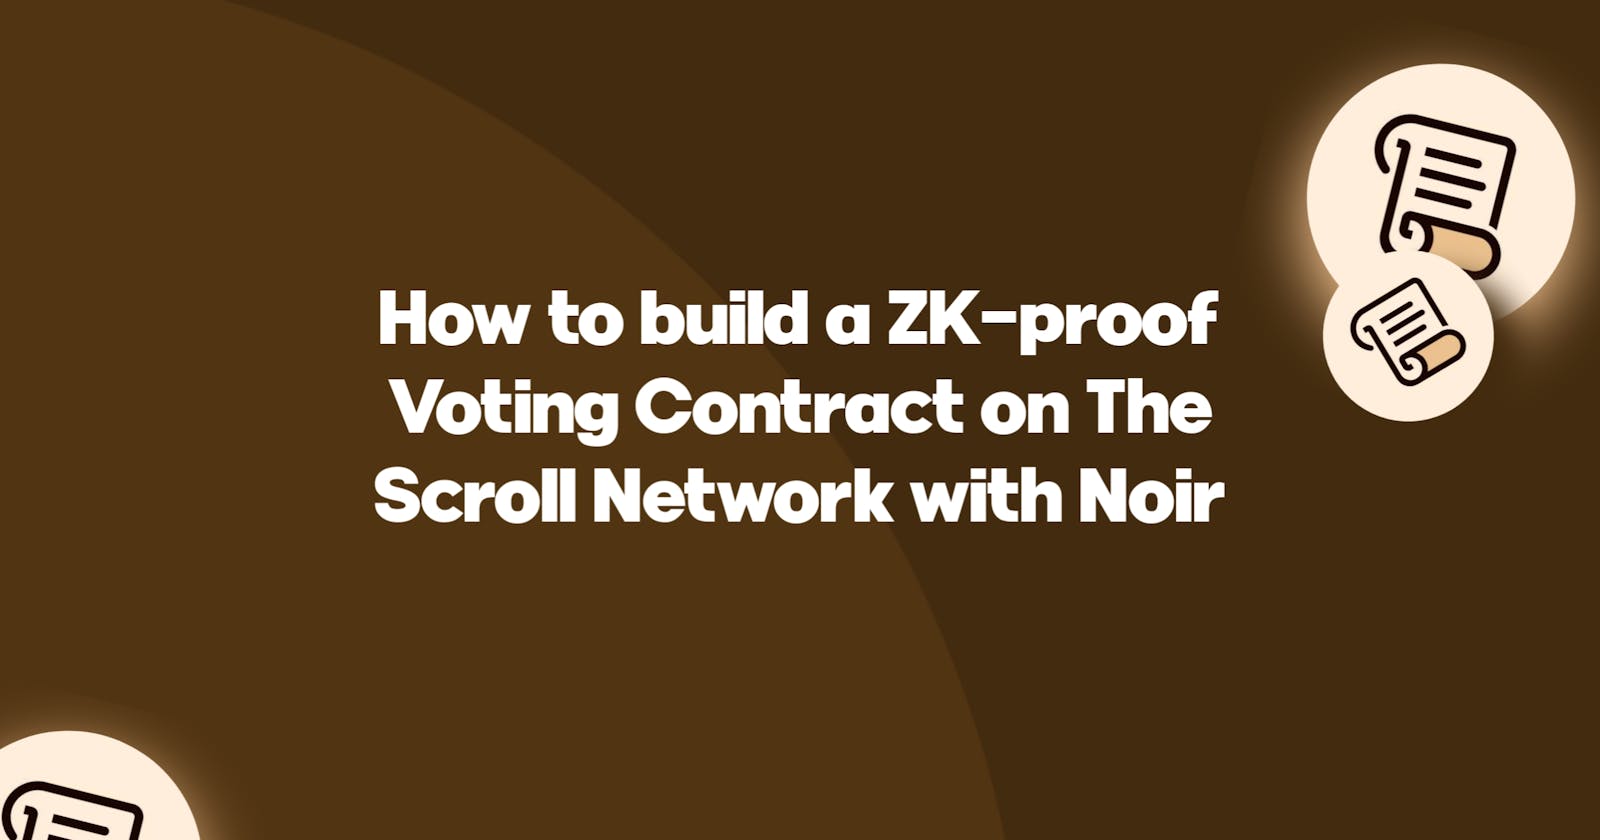 How to build a ZK-Proof Voting Contract on The Scroll Network with Noir